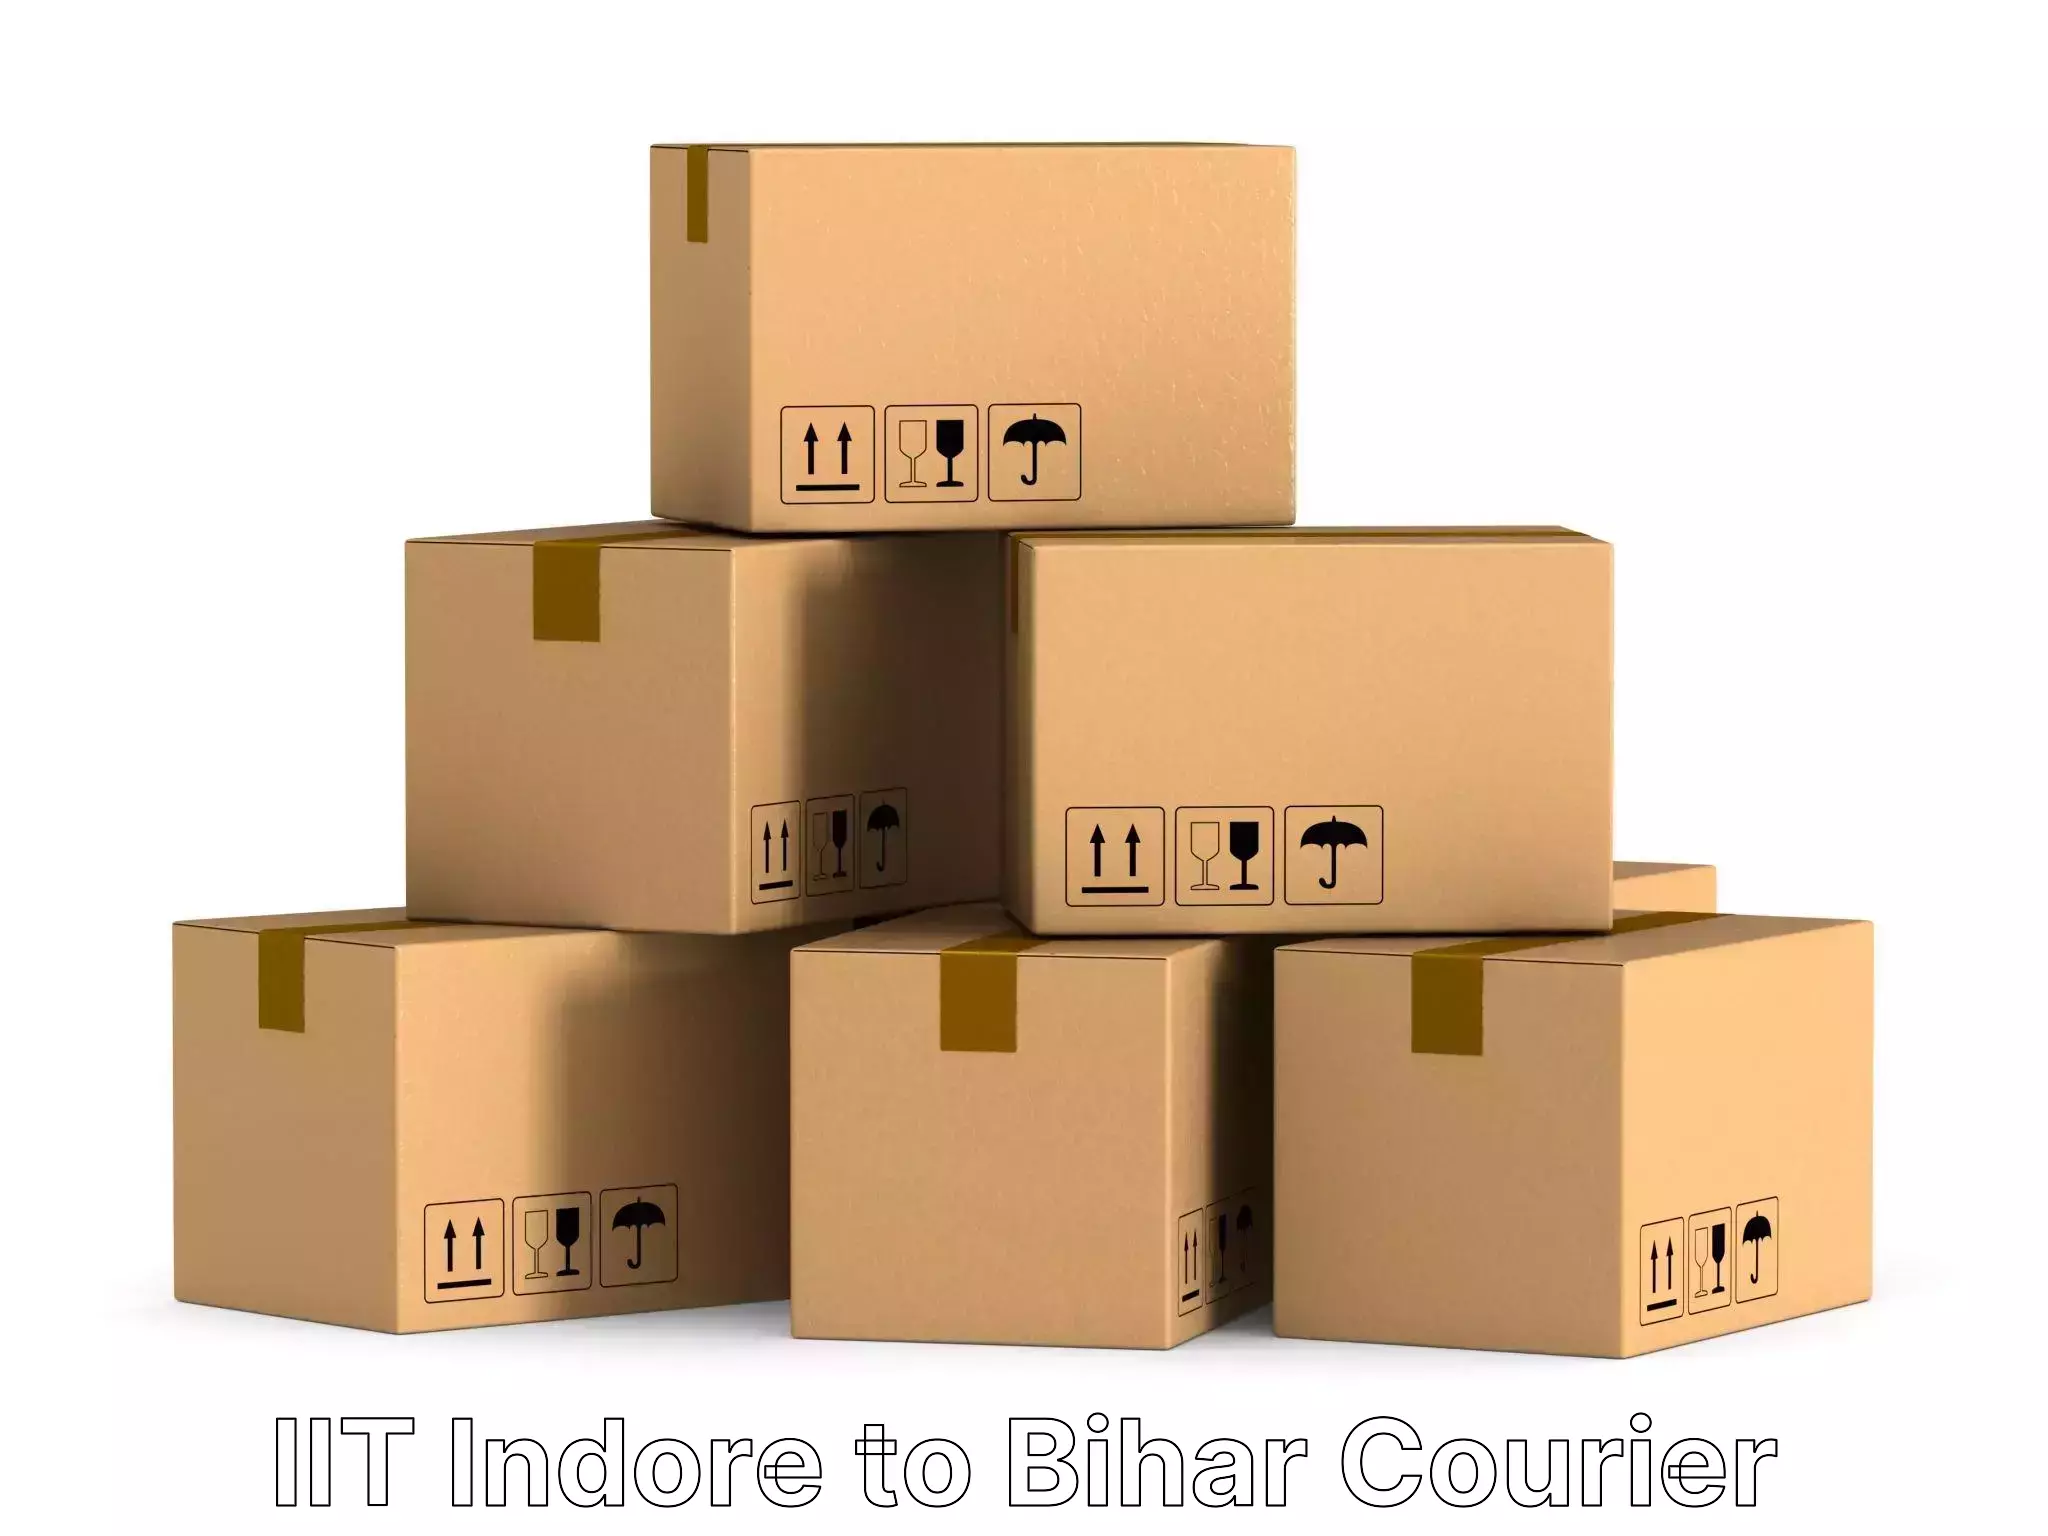 Furniture transport specialists IIT Indore to Dhaka